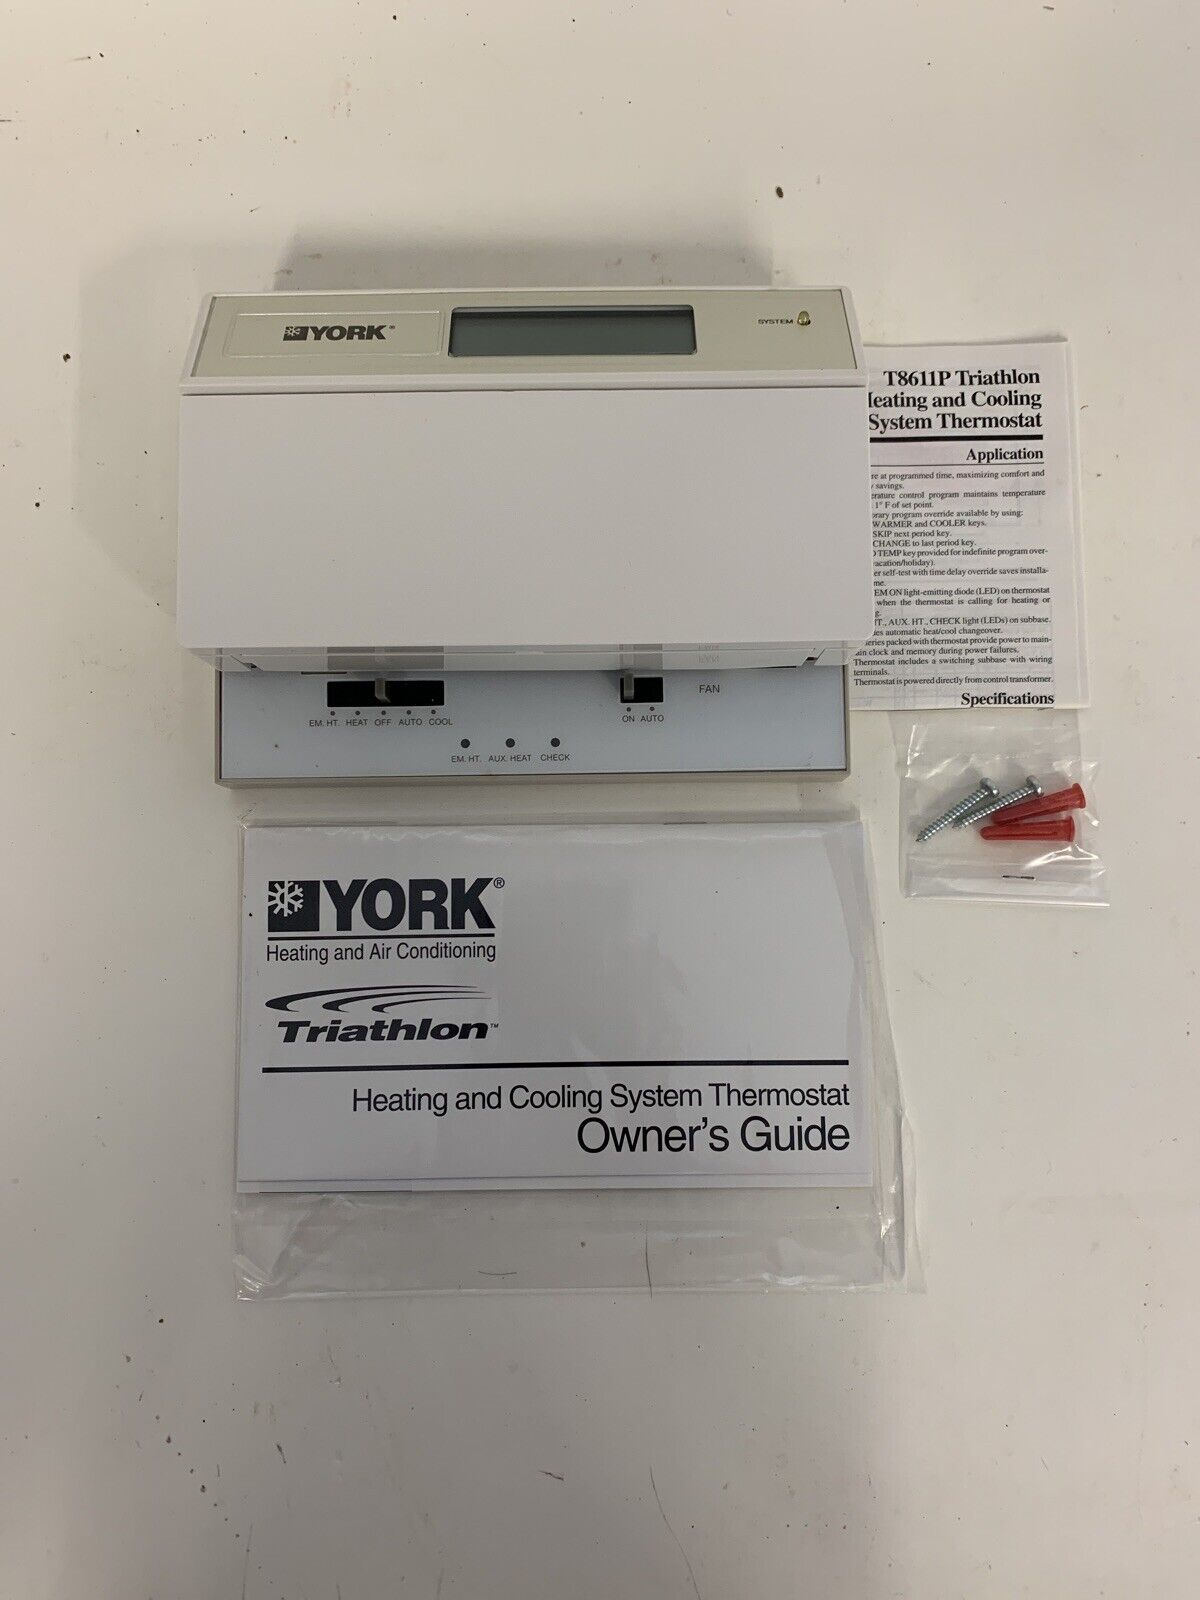 York T8611R P 7019 Heating And Cooling System  thermostat 24VAC Transformer